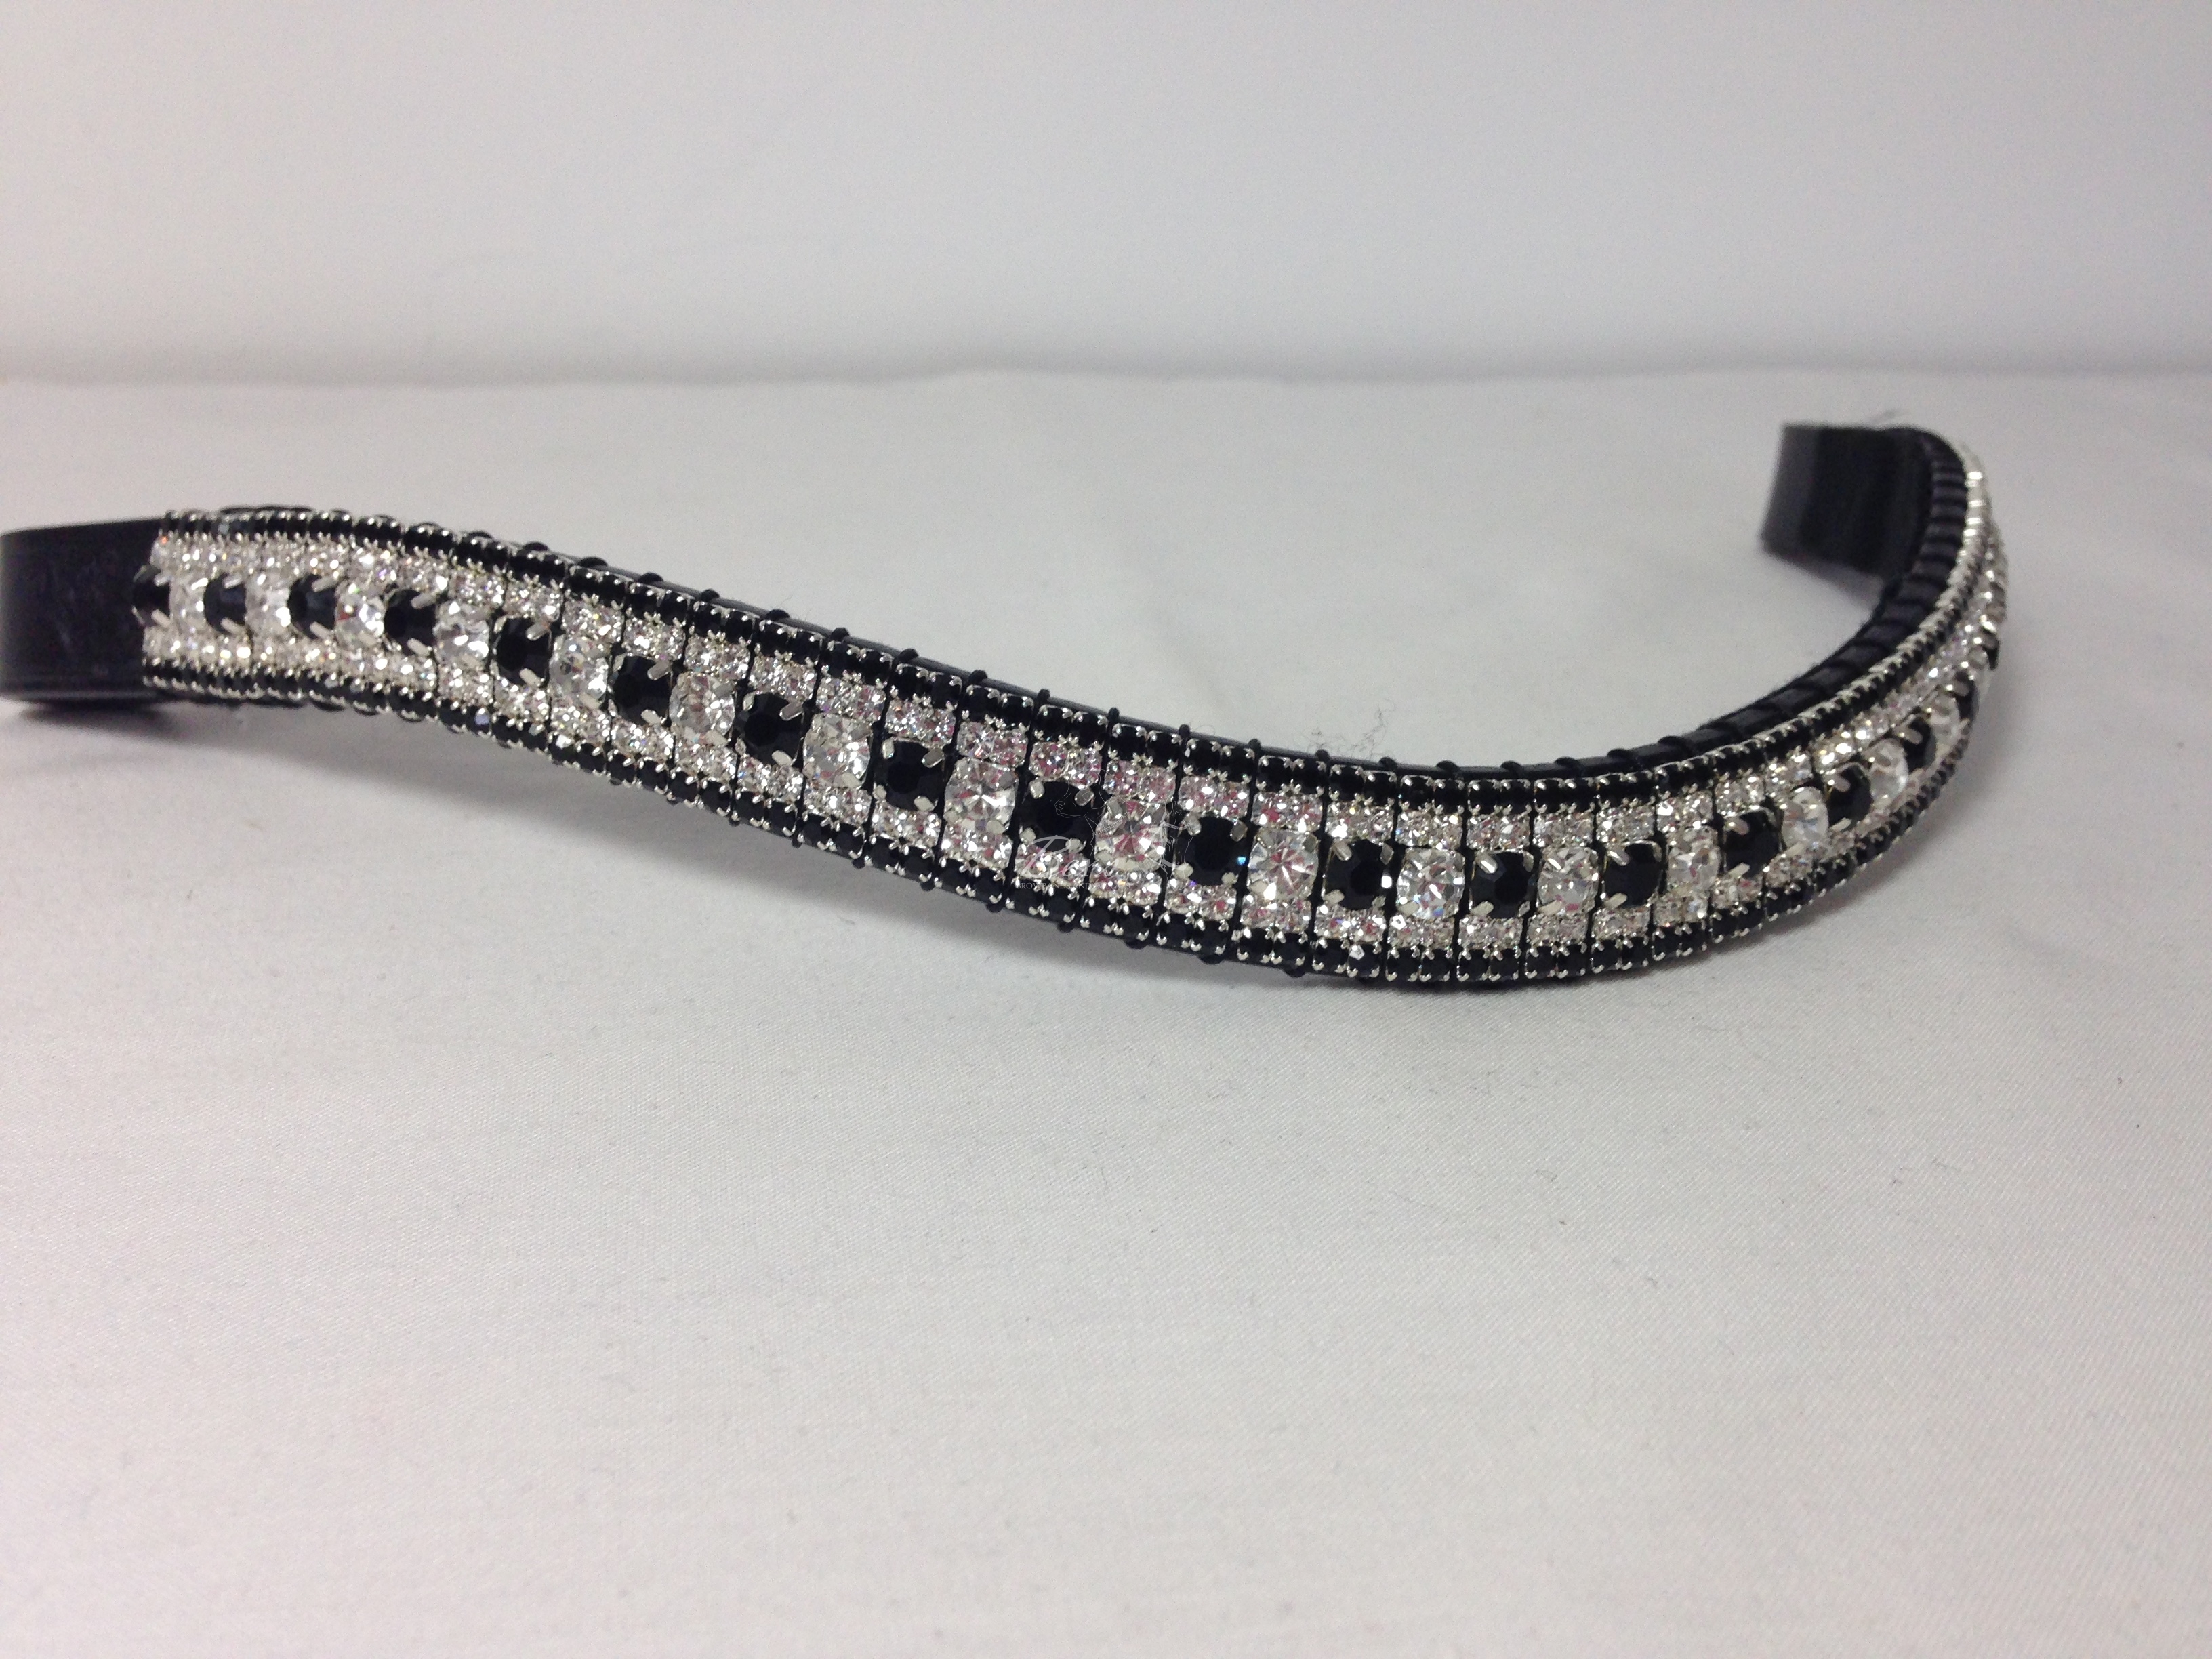 Curved 3/4" Preciosa Crystal Browband: Clear/Jet 6mm, Clear (Silver casing) 3mm and Jet 3mm. 